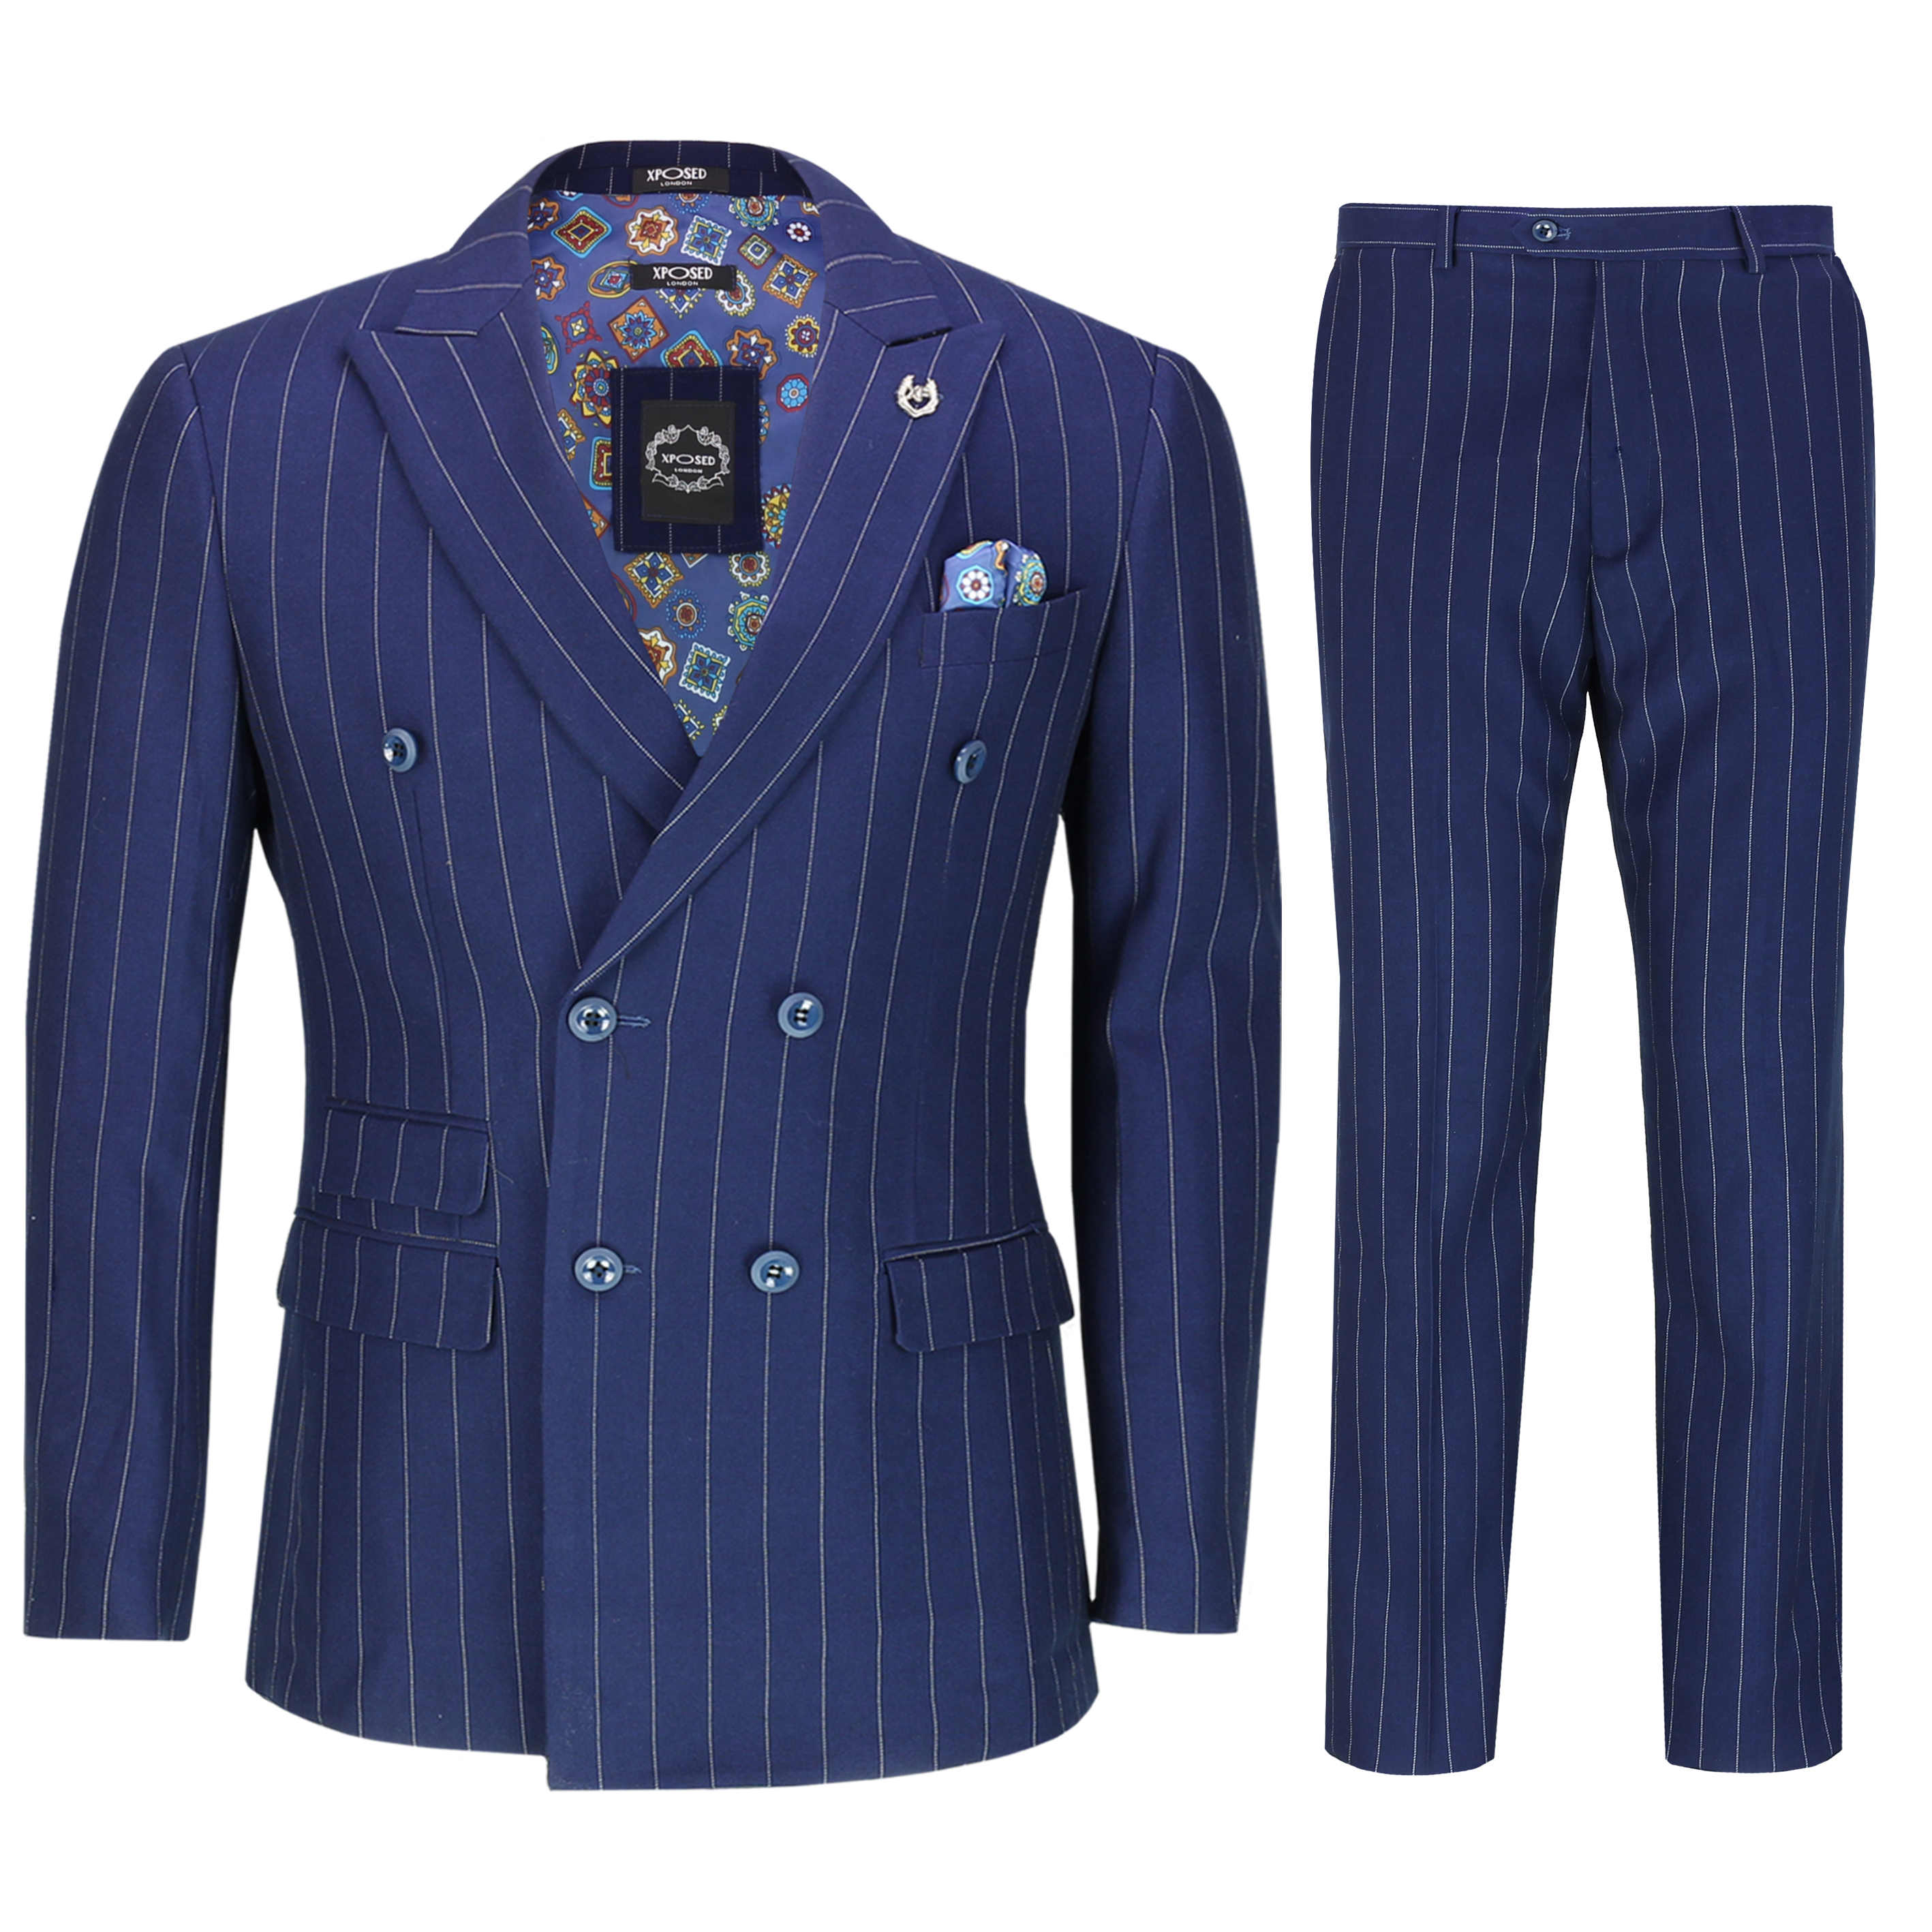 Men’s 3 Piece Double Breasted Suit Blue Pinstripe 1920 Retro Gatsby Tailored Fit